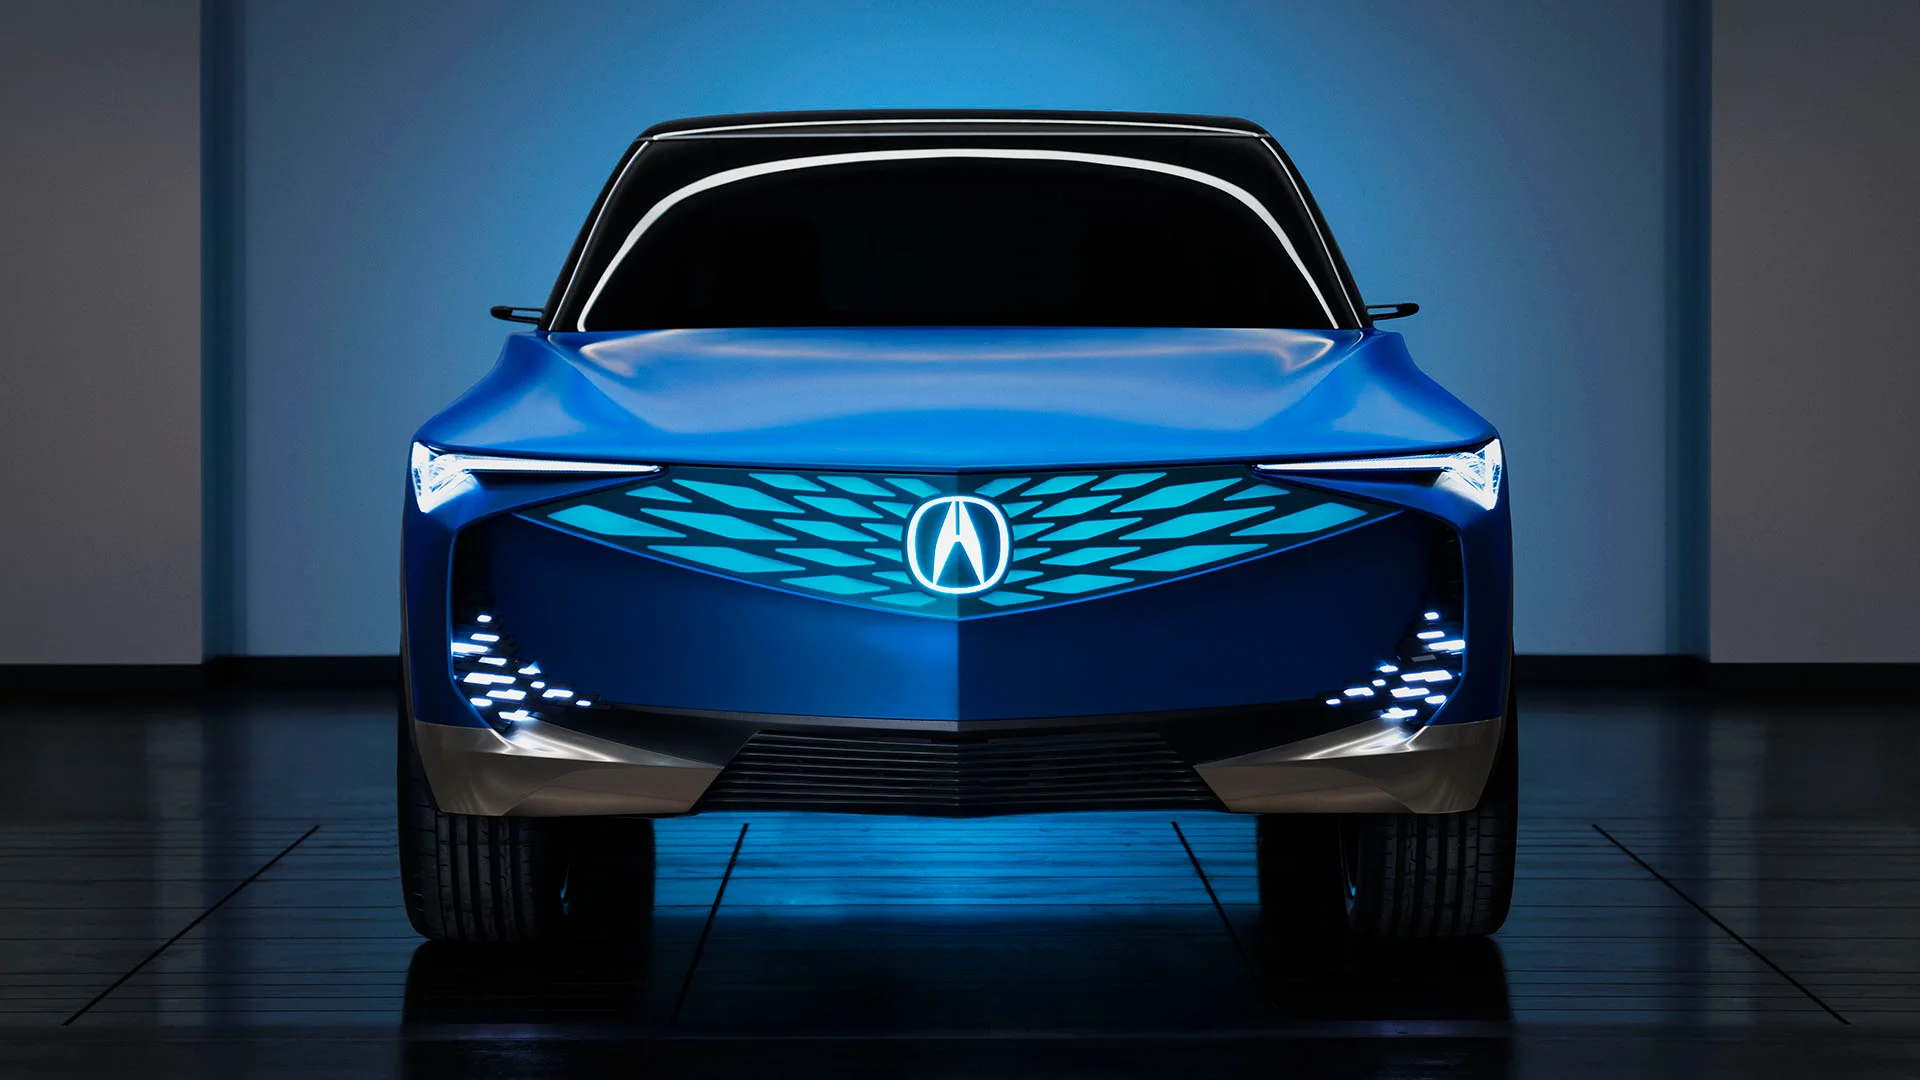 https://e-vehicleinfo.com/global/acura-revealed-its-first-electric-car-acura-zdx-and-zdx-type-s/